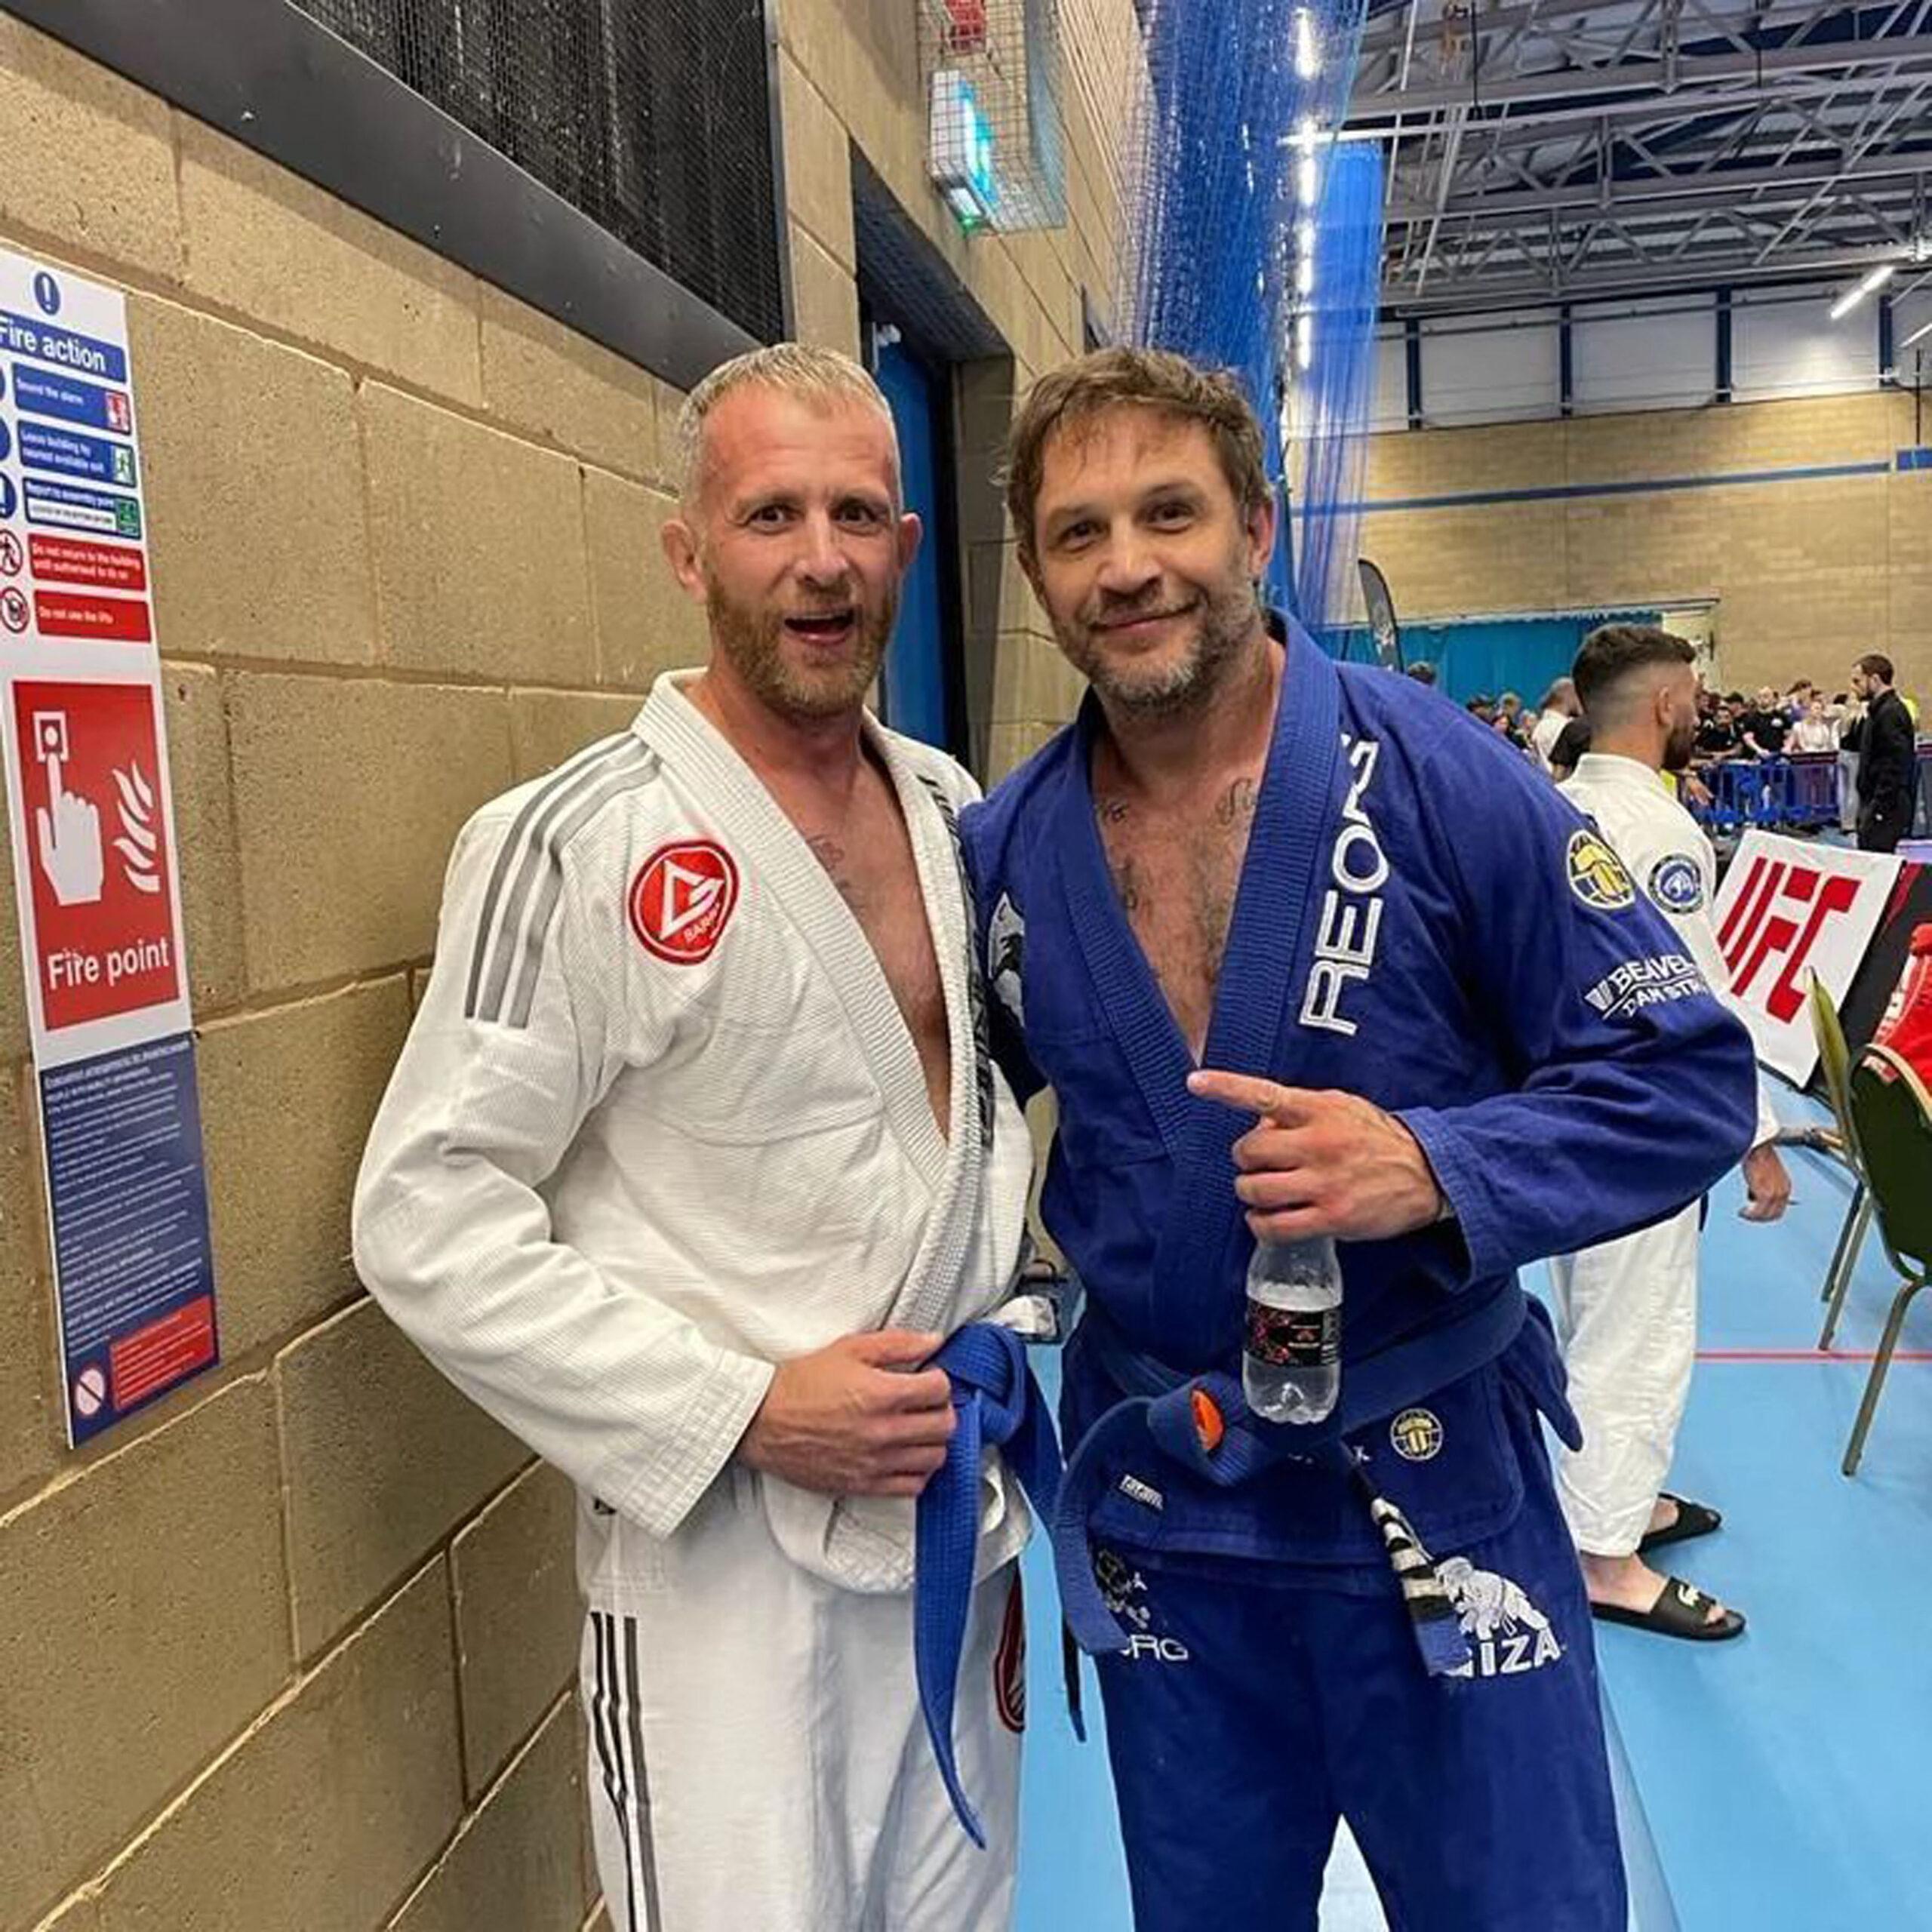 Tom Hardy is a real-life action man as he wins two gold medals in Jiu-Jitsu competition